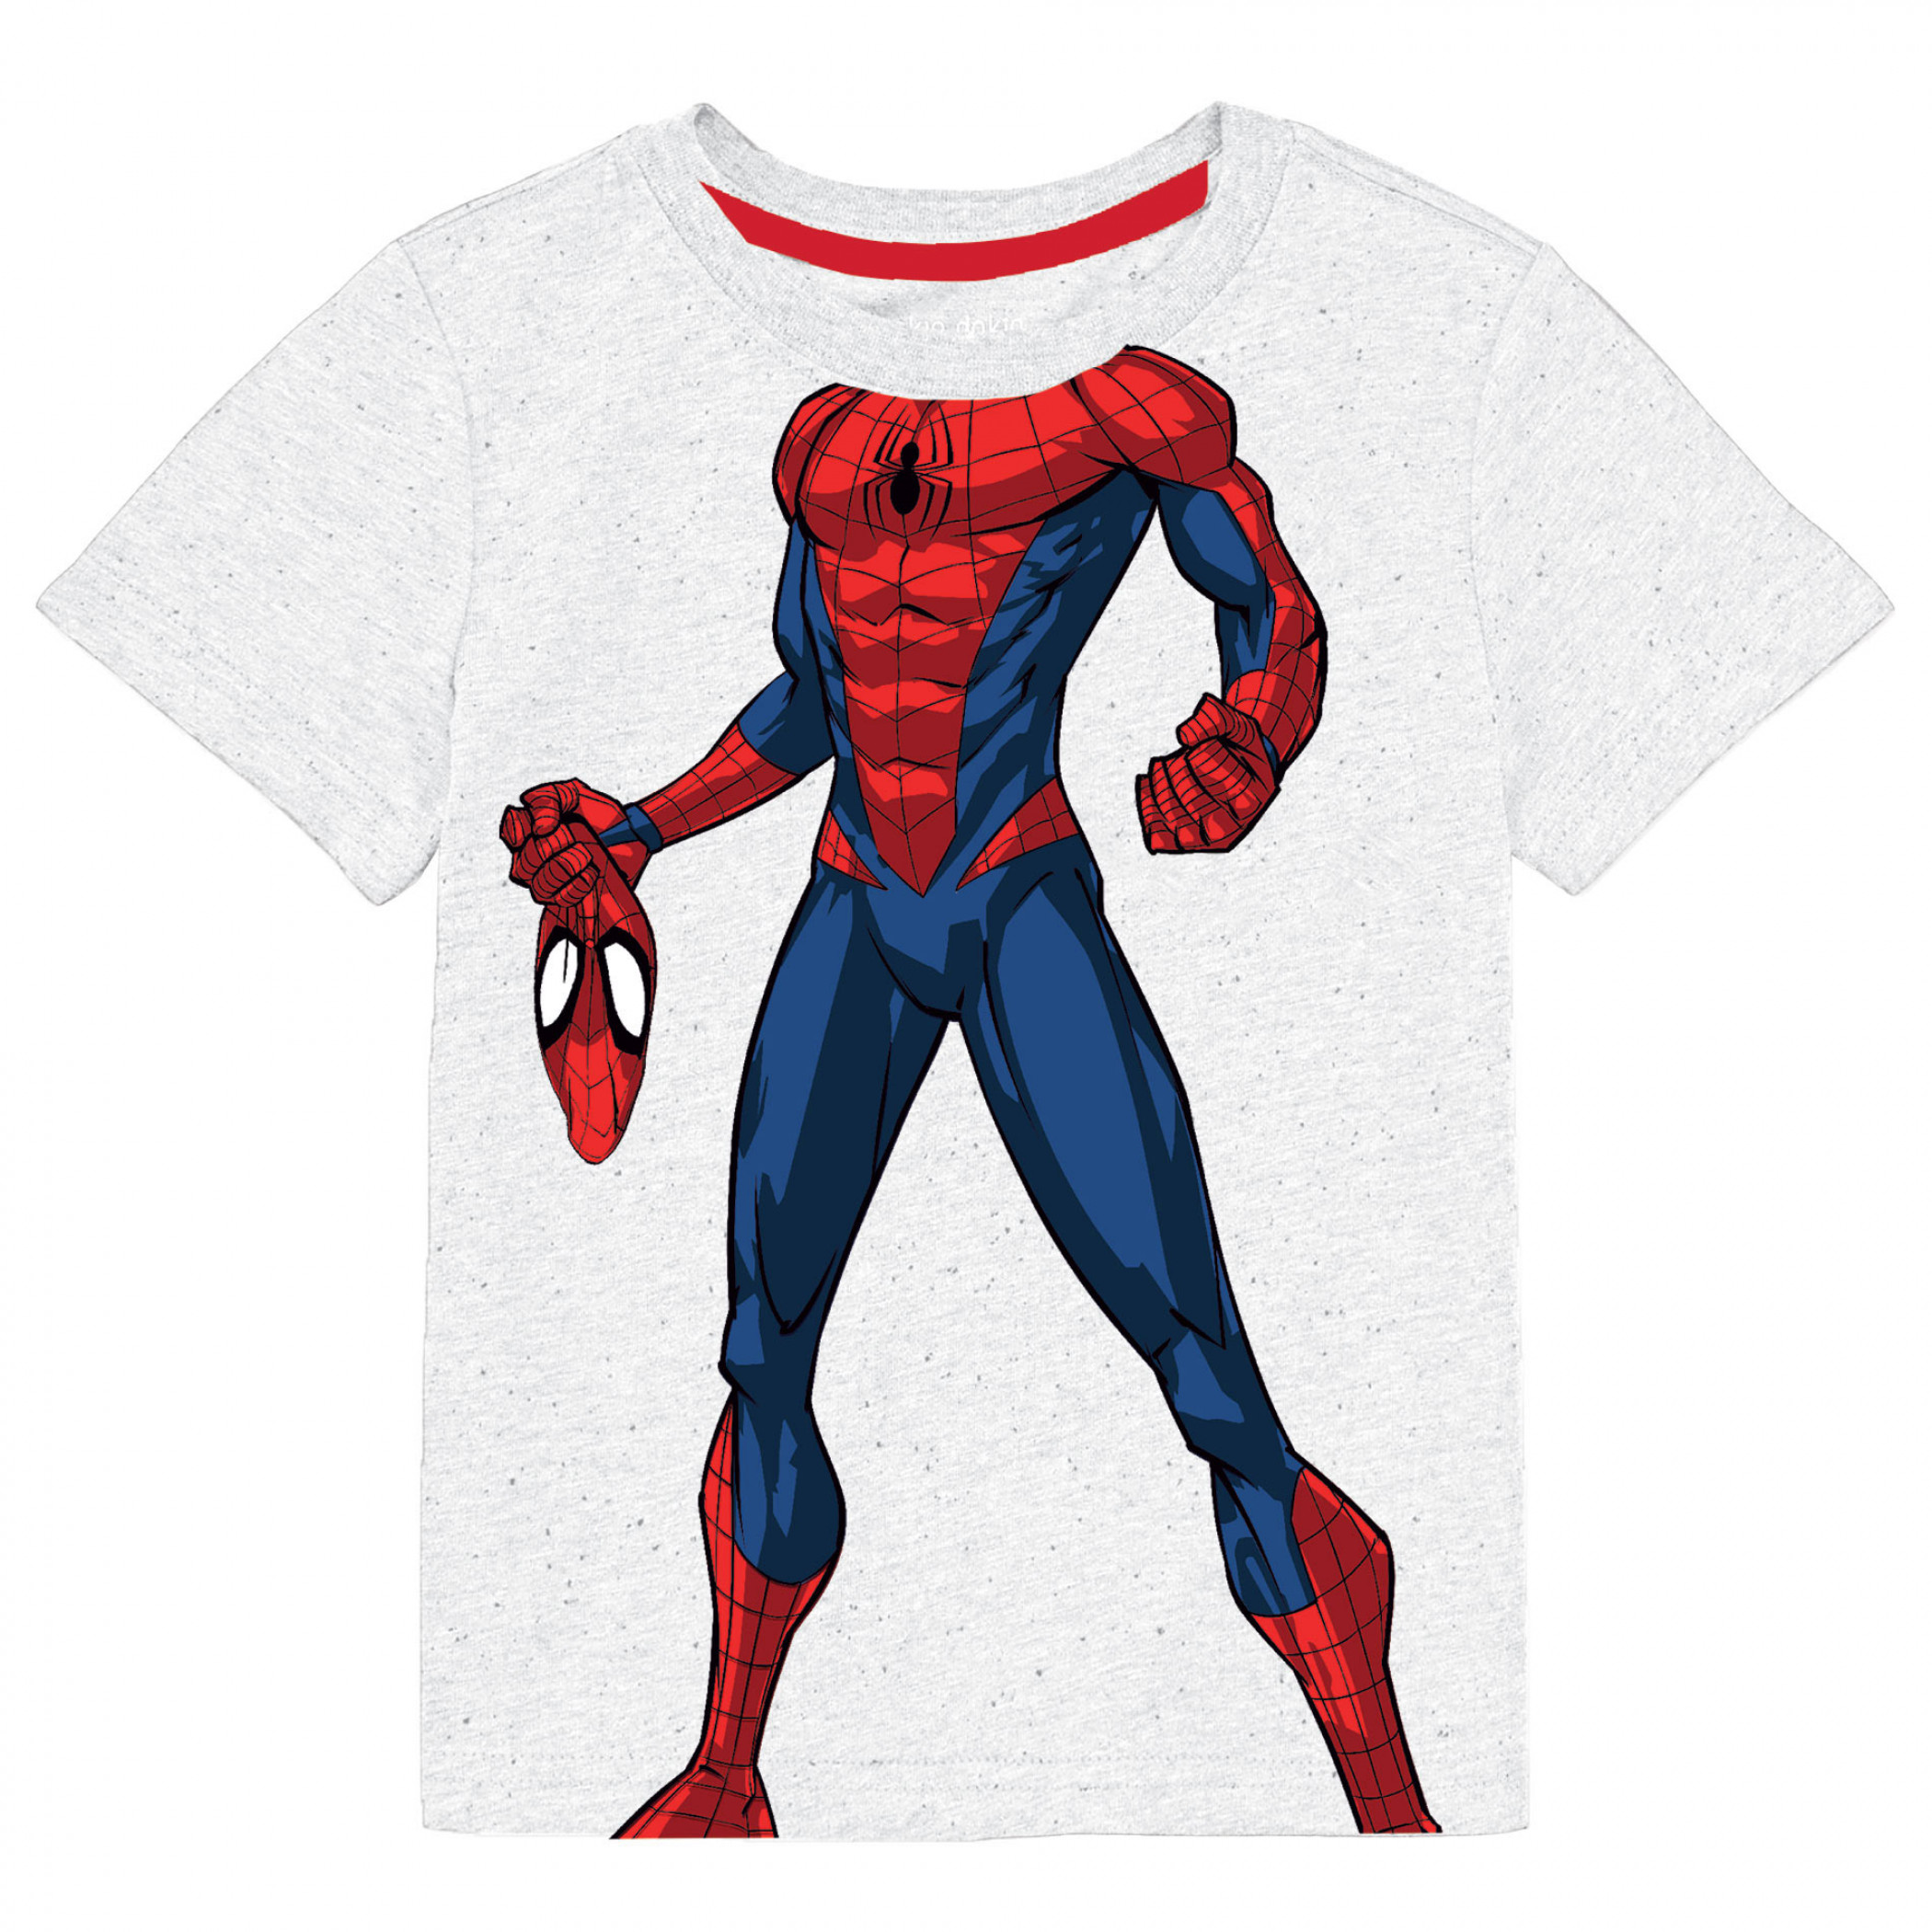 Spider-Man Youth Boys White Costume T-Shirt